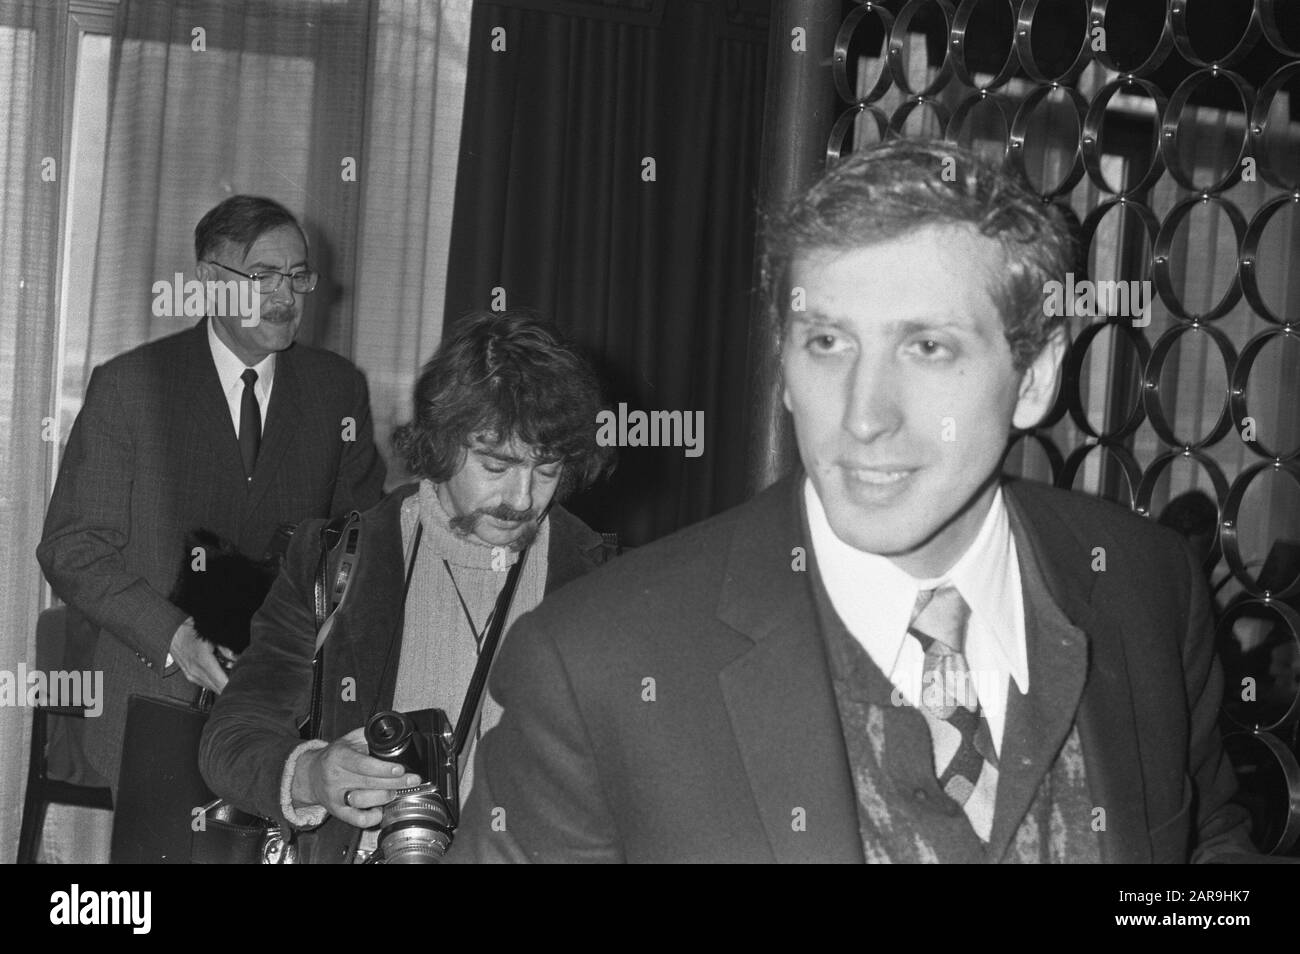 The World Chess Championship 1972 was a match between challenger Bobby  Fischer of the United States and defending champion Boris Sp…